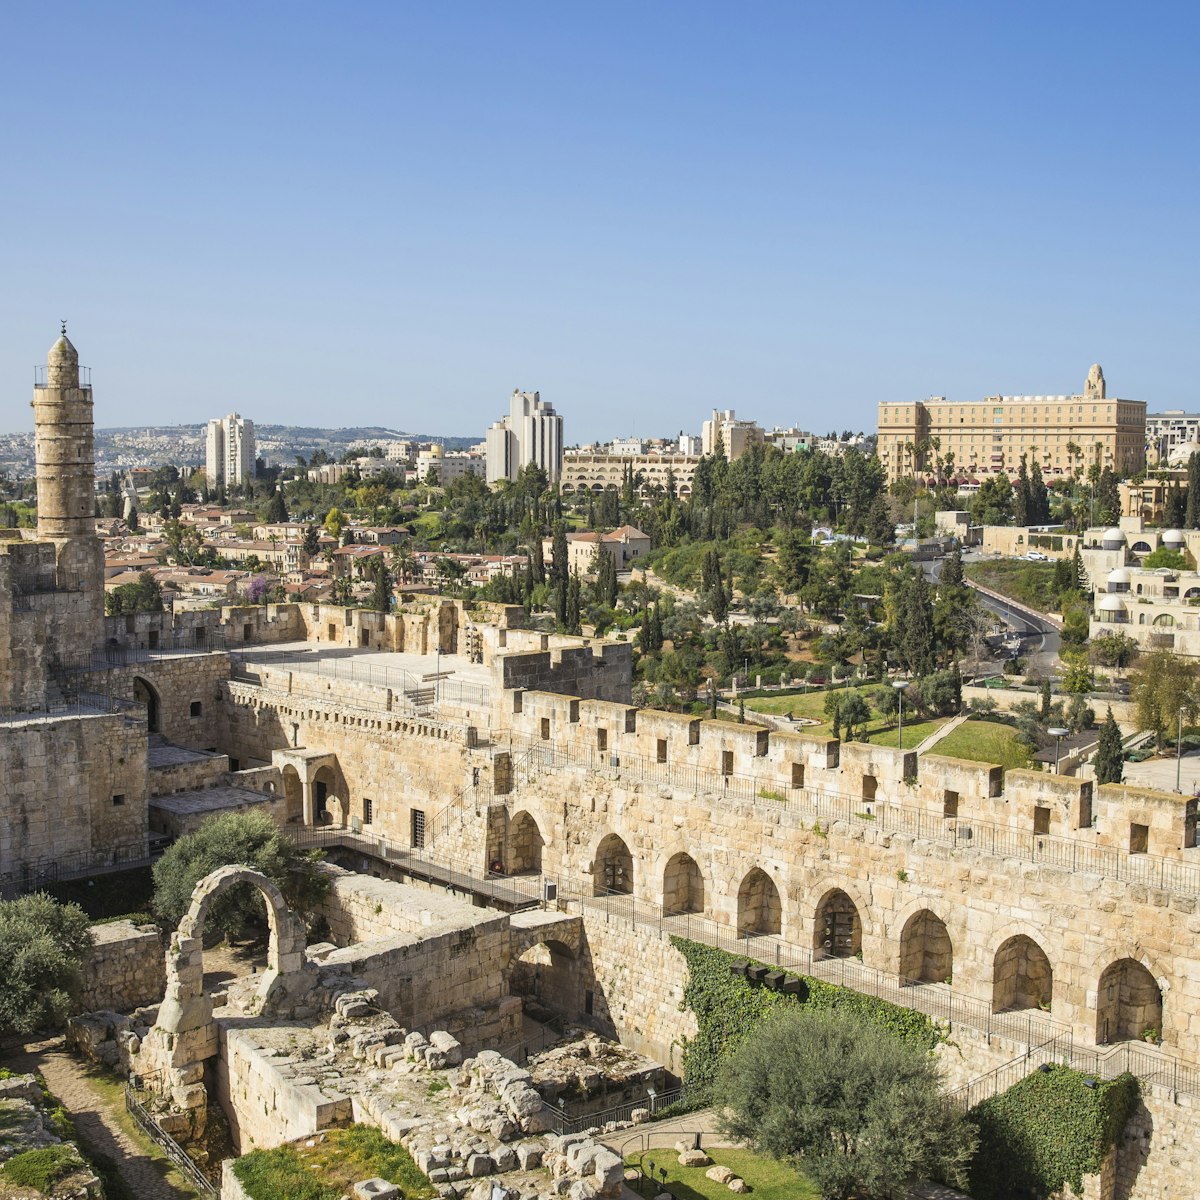 Israel, Jerusalem, Old Town, The Tower of David also known as the Jerusalem Citadel